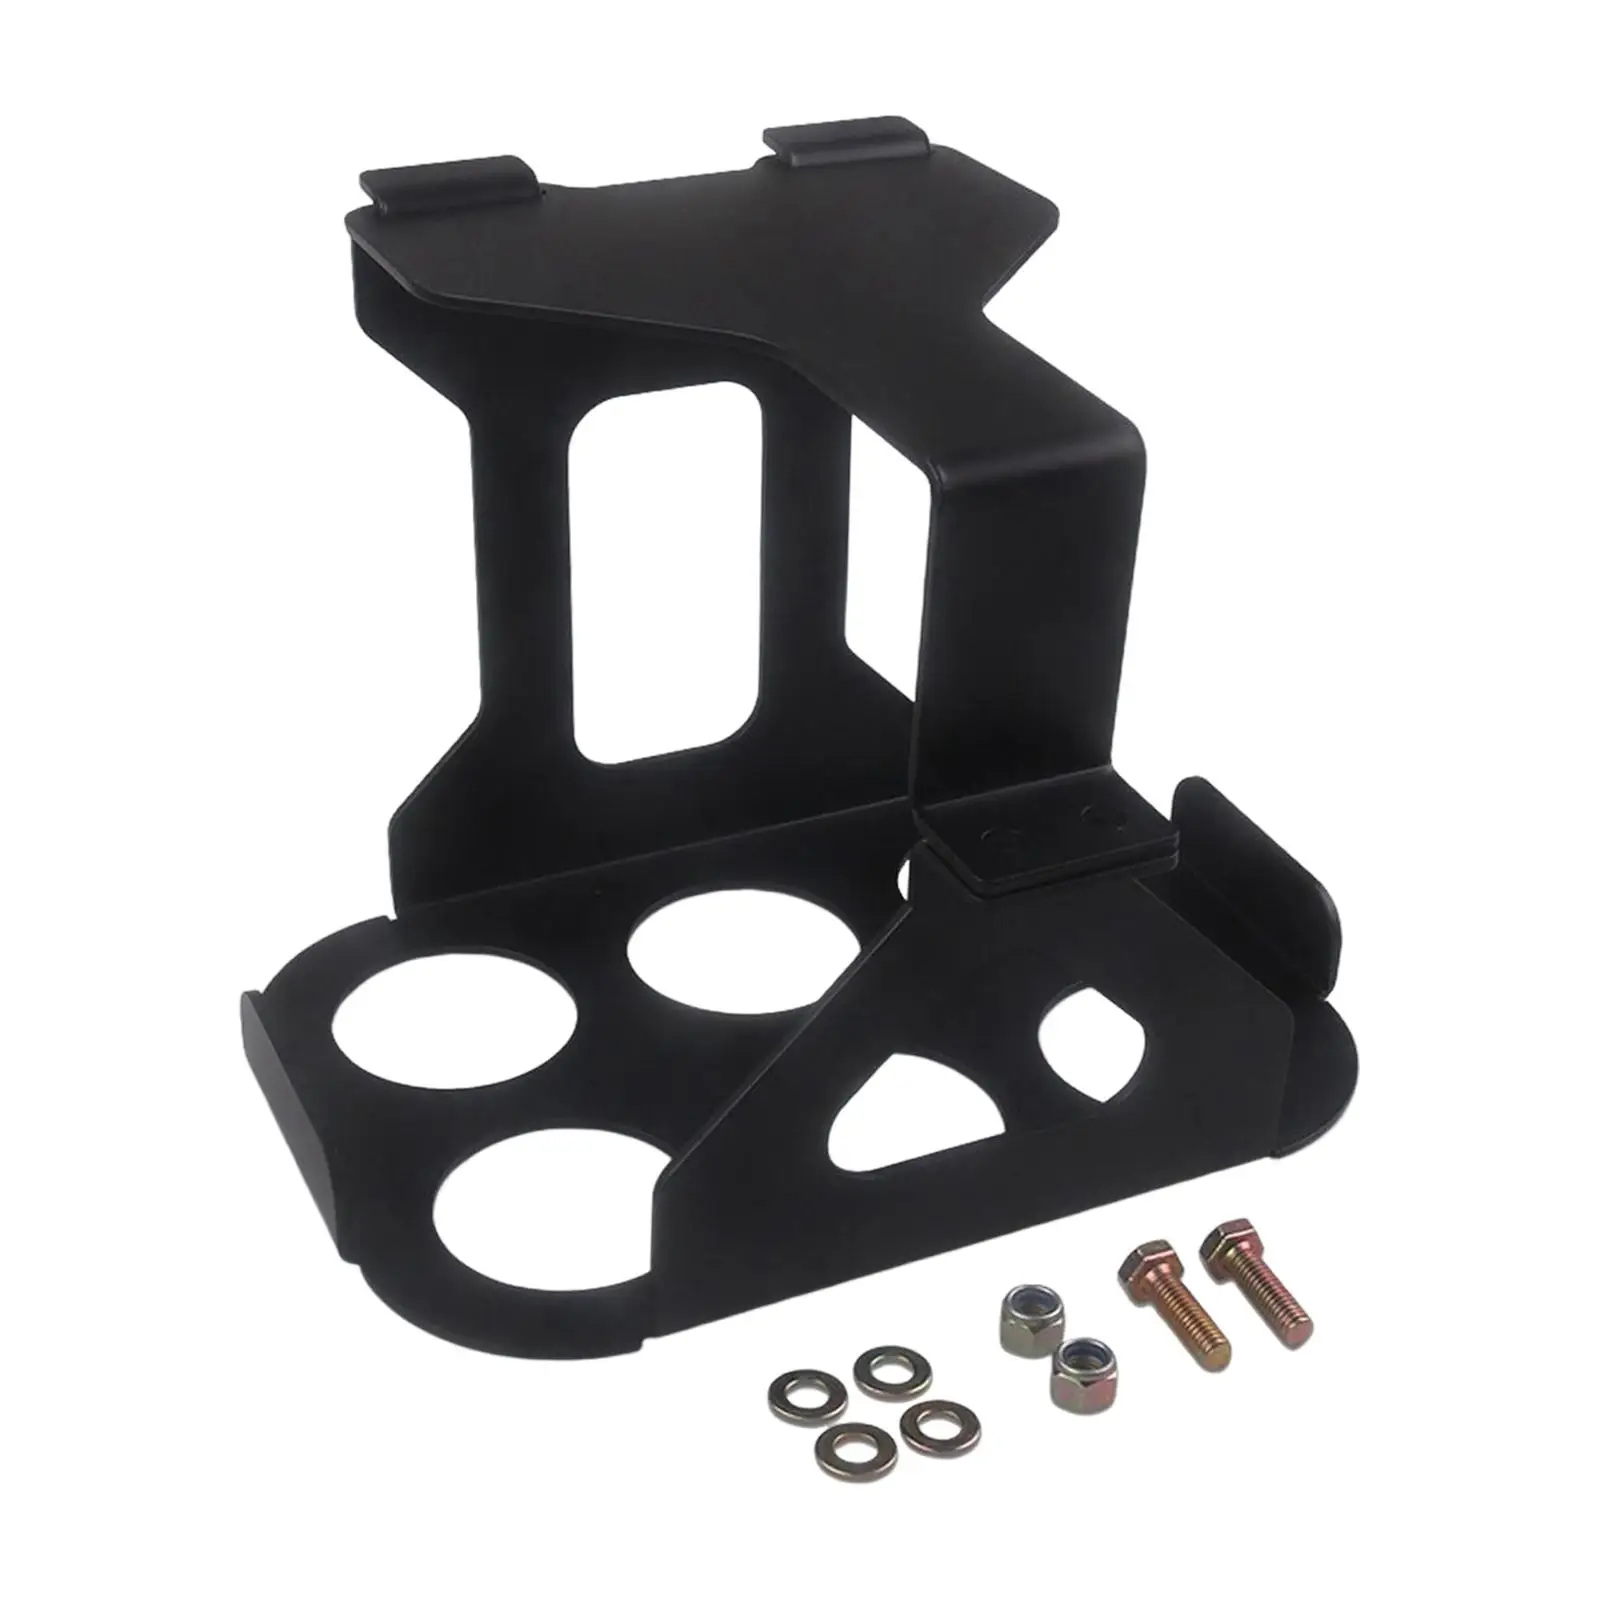 Battery Box Tray Assembly Easy to Install Replaces Professional ATV UTV Truck Battery Mount Holder for Battery Red 34 78